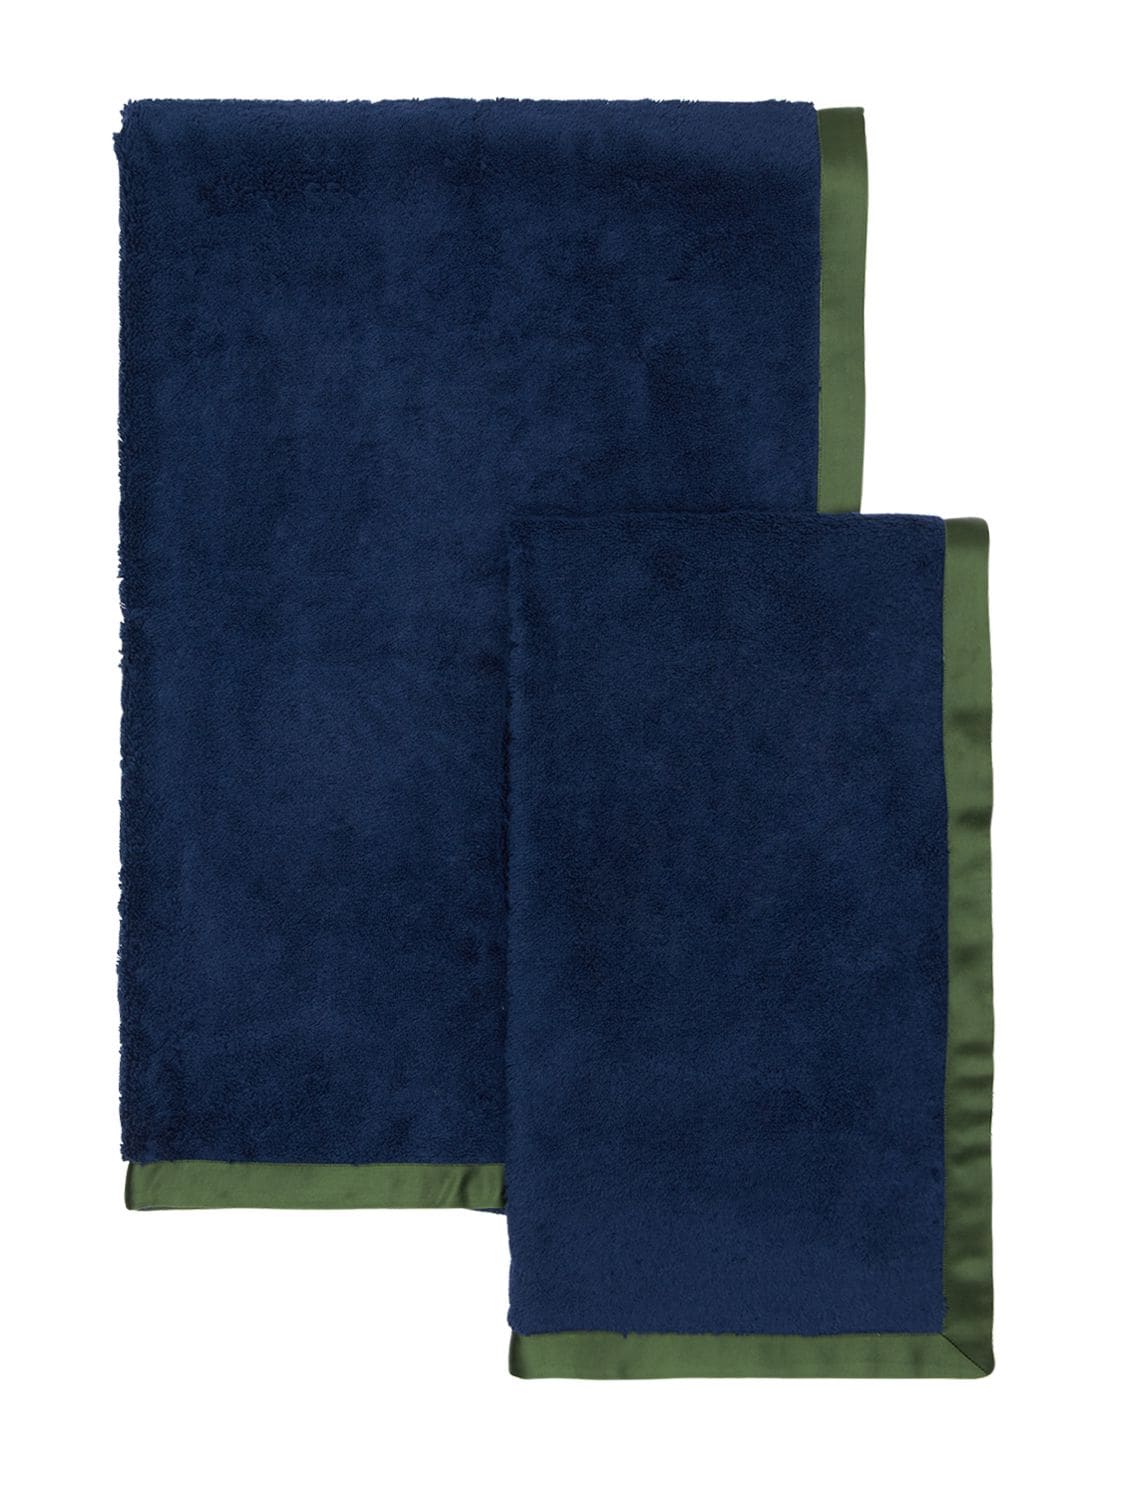 Alessandro Di Marco Set Of 2 Cotton Terrycloth Towels In Blue,green